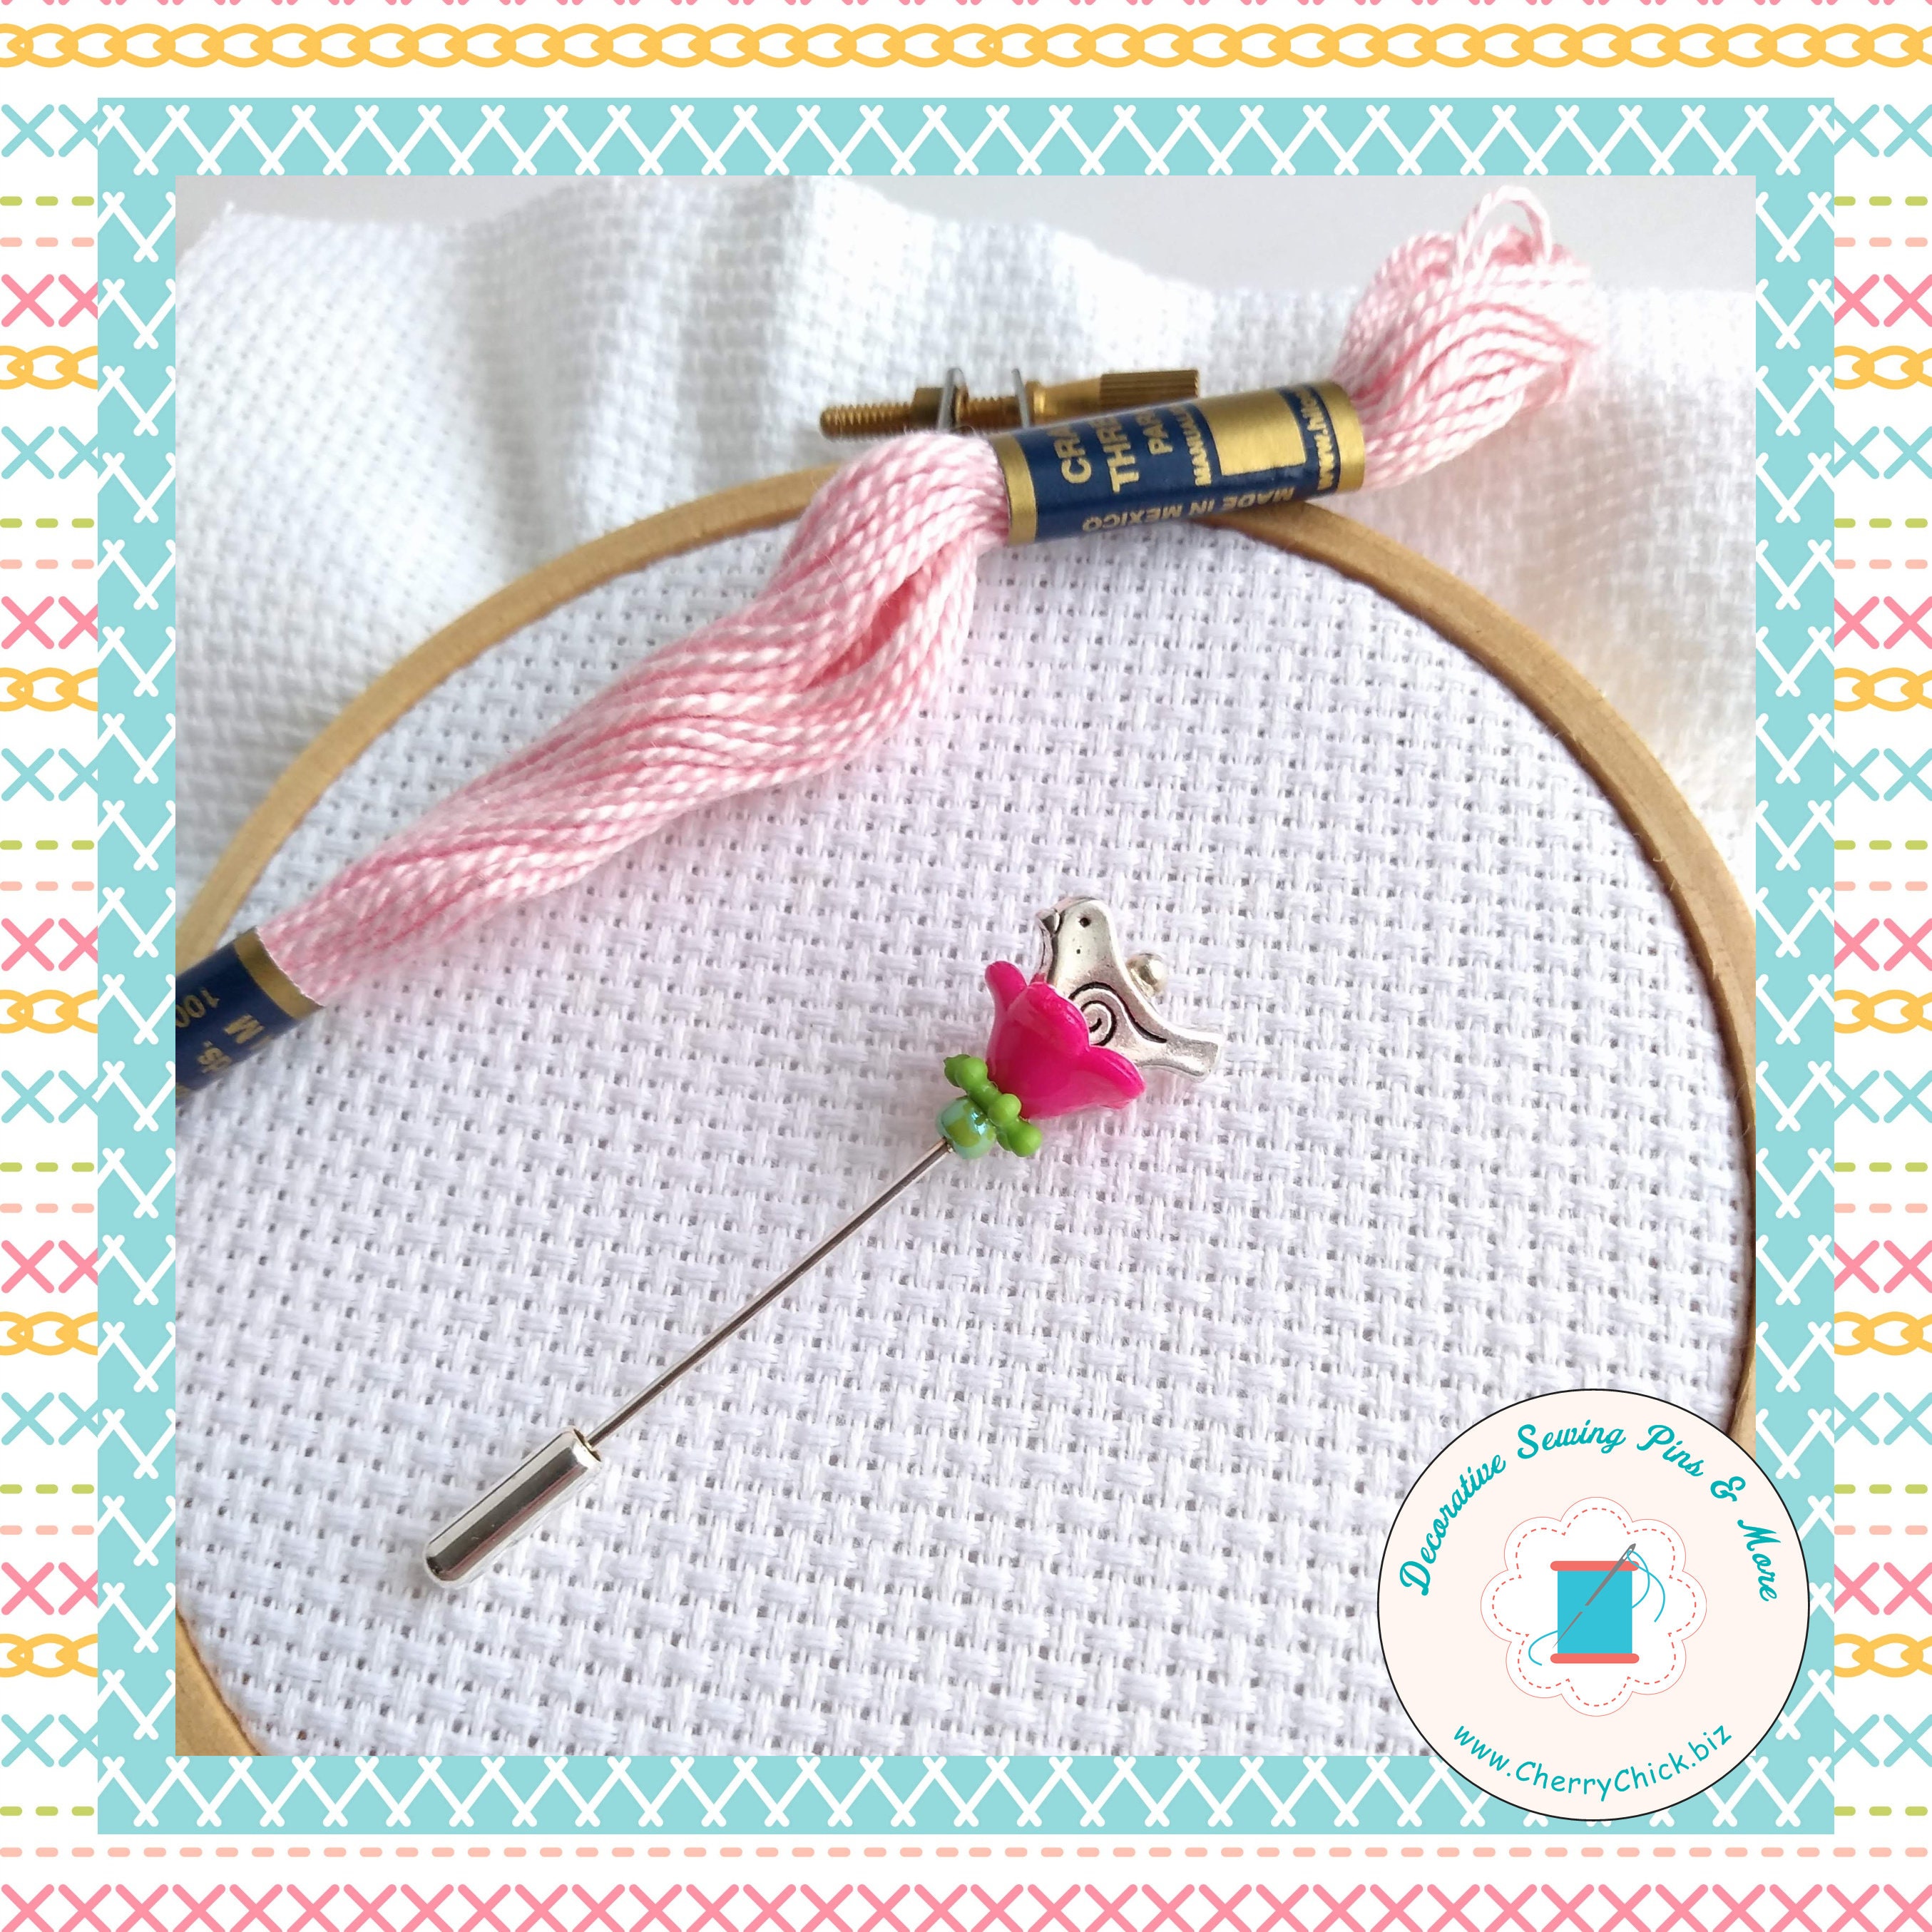 Counting Pin - Bird Counting Pin - Gift for Cross Stitchers - Decorative Pin  - Marking Pin - Stitch counter - Stick Pin